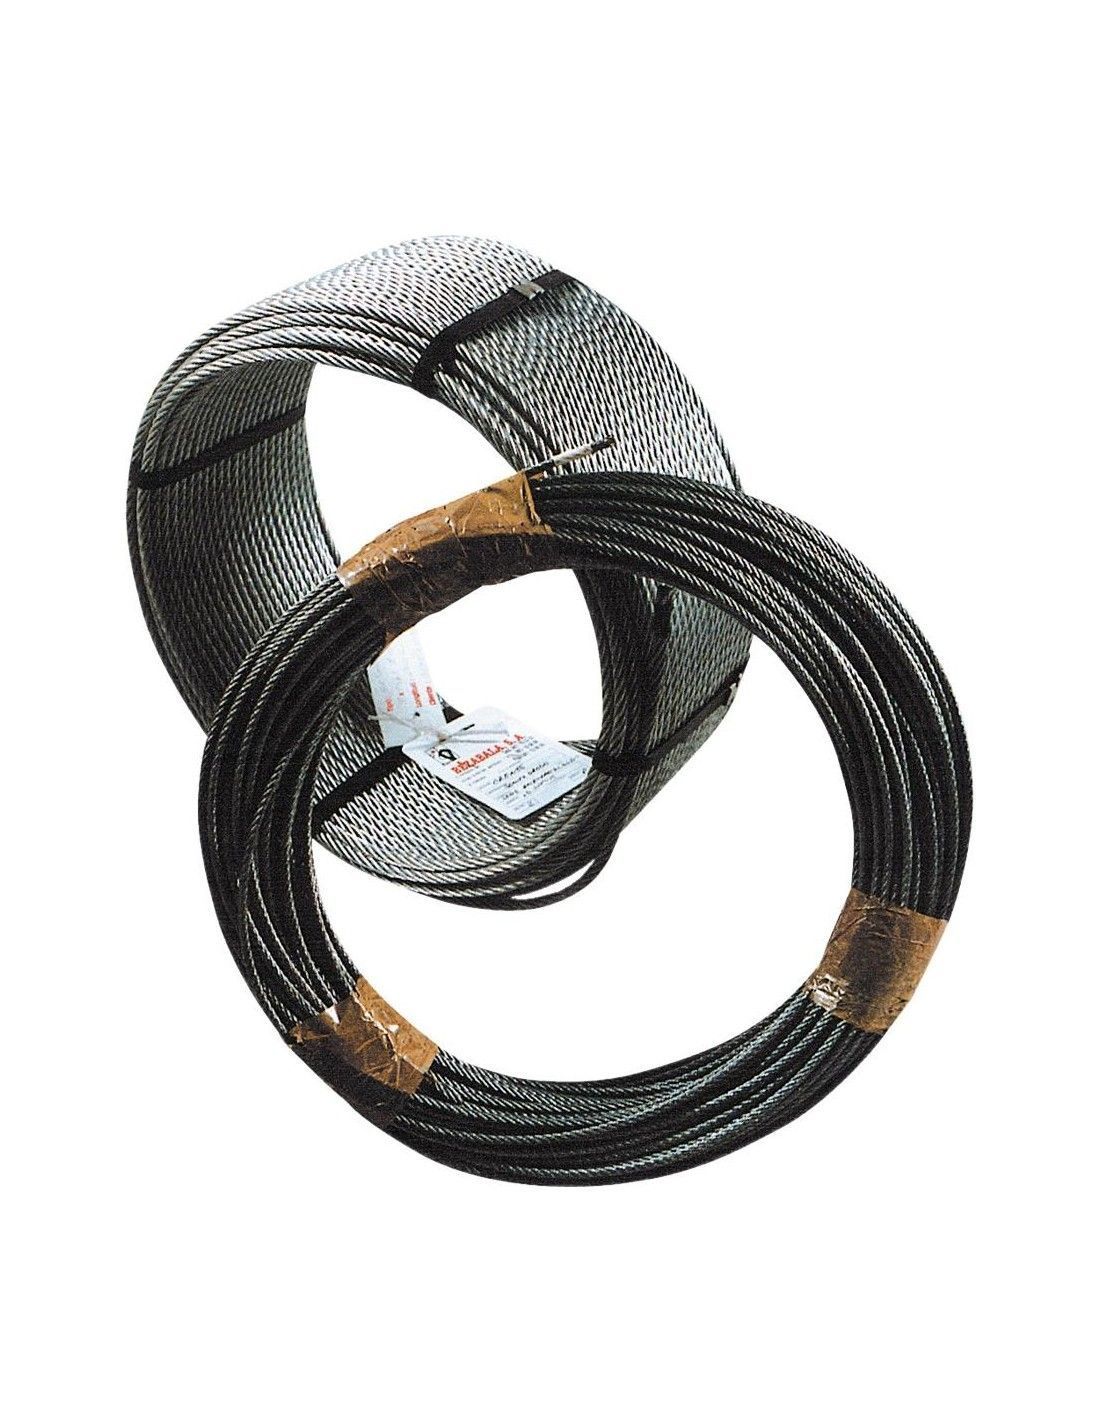 Cable Acero - 4mm 100m